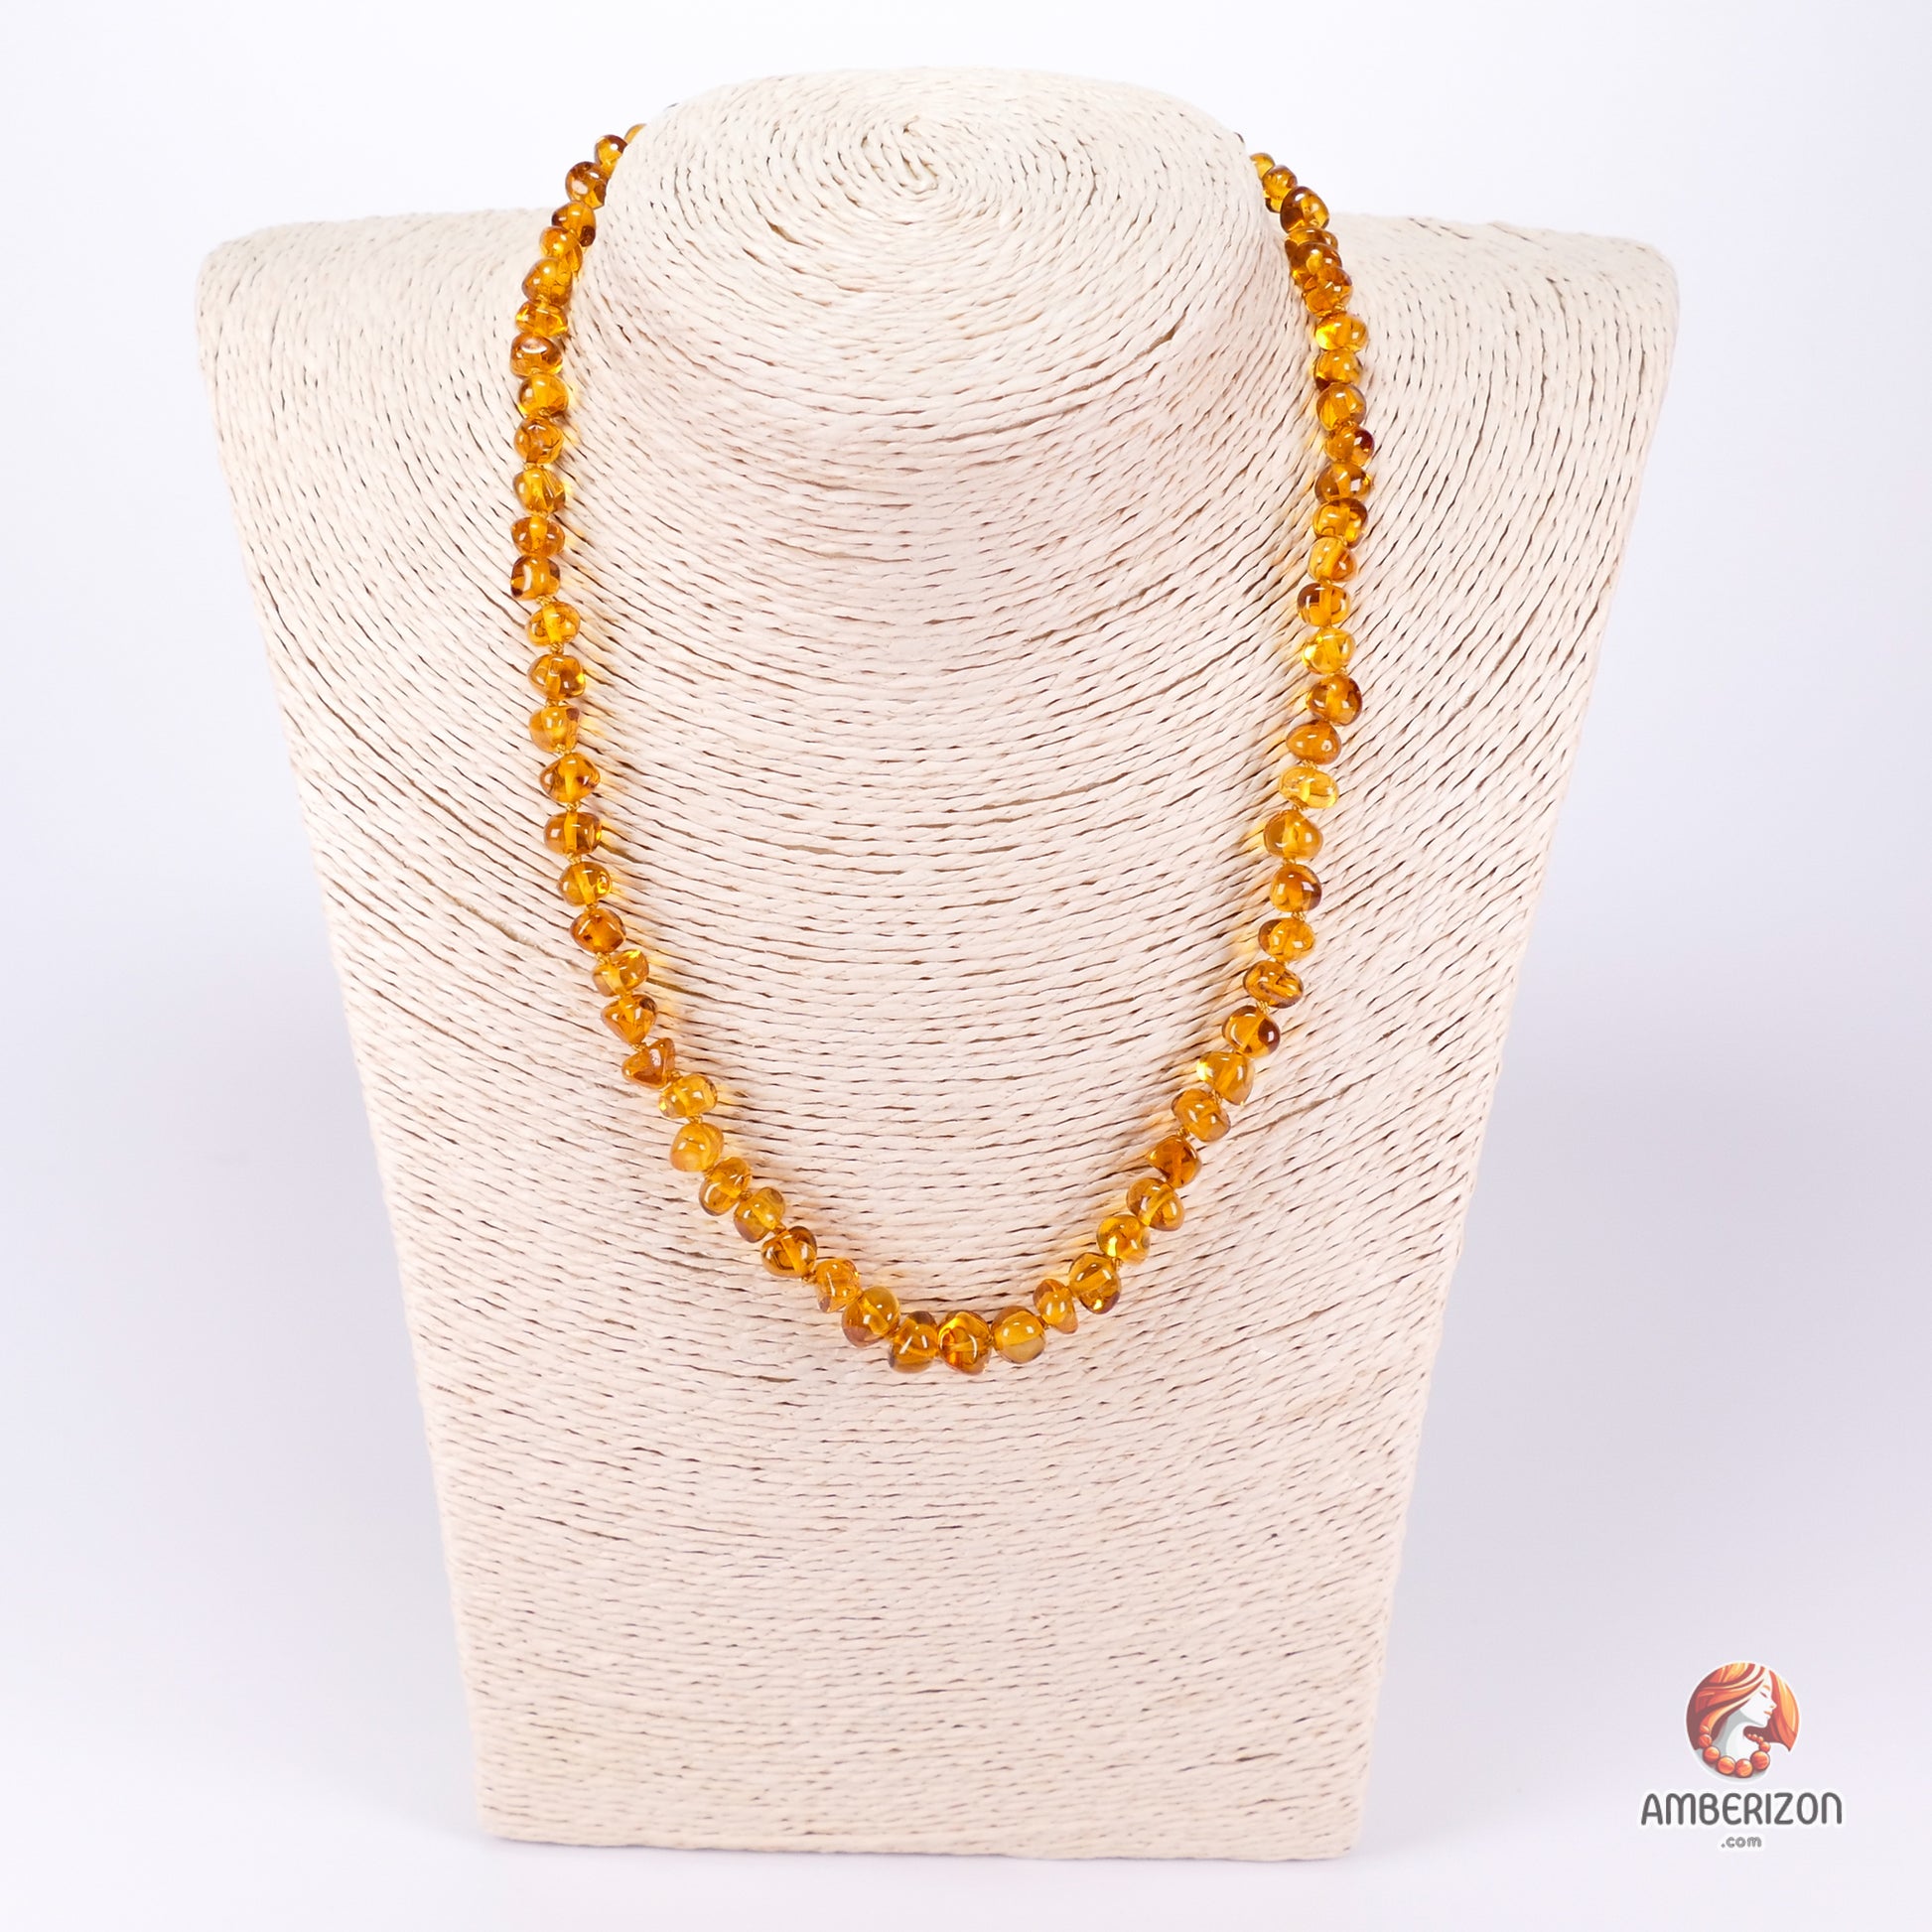 Unisex Baltic Amber Necklace for Women - Certified Authenticity